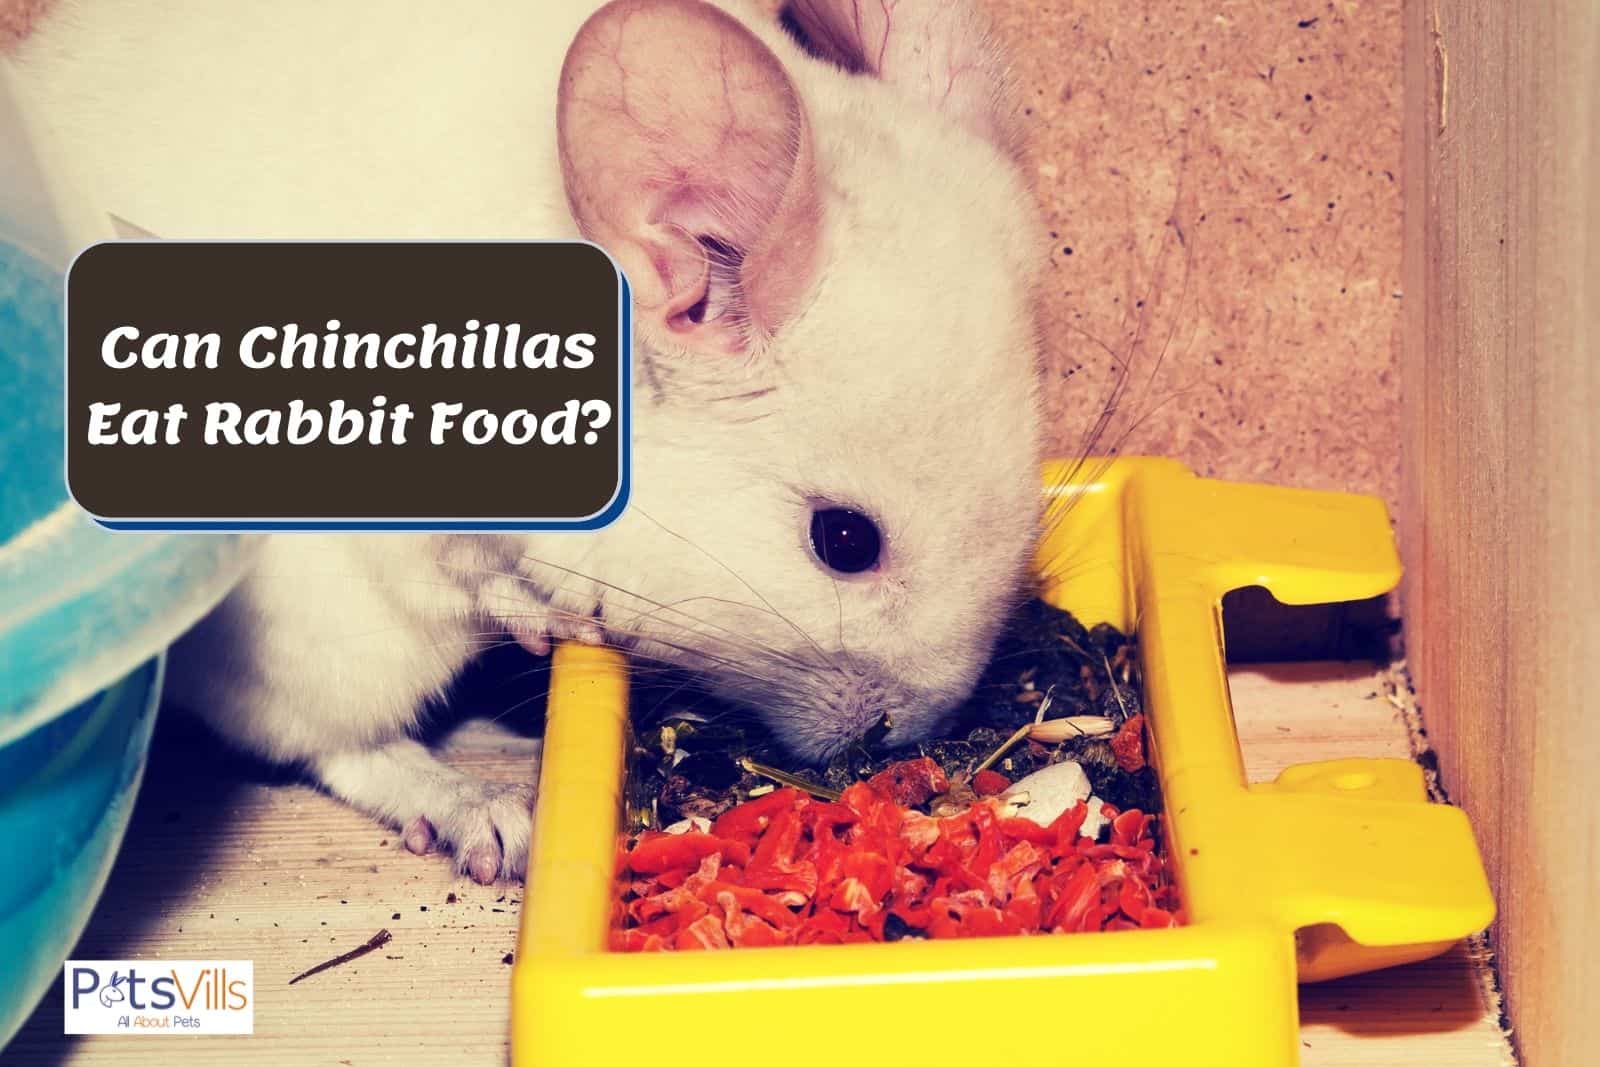 chinchilla eating on his plate but can chinchillas eat rabbit food?